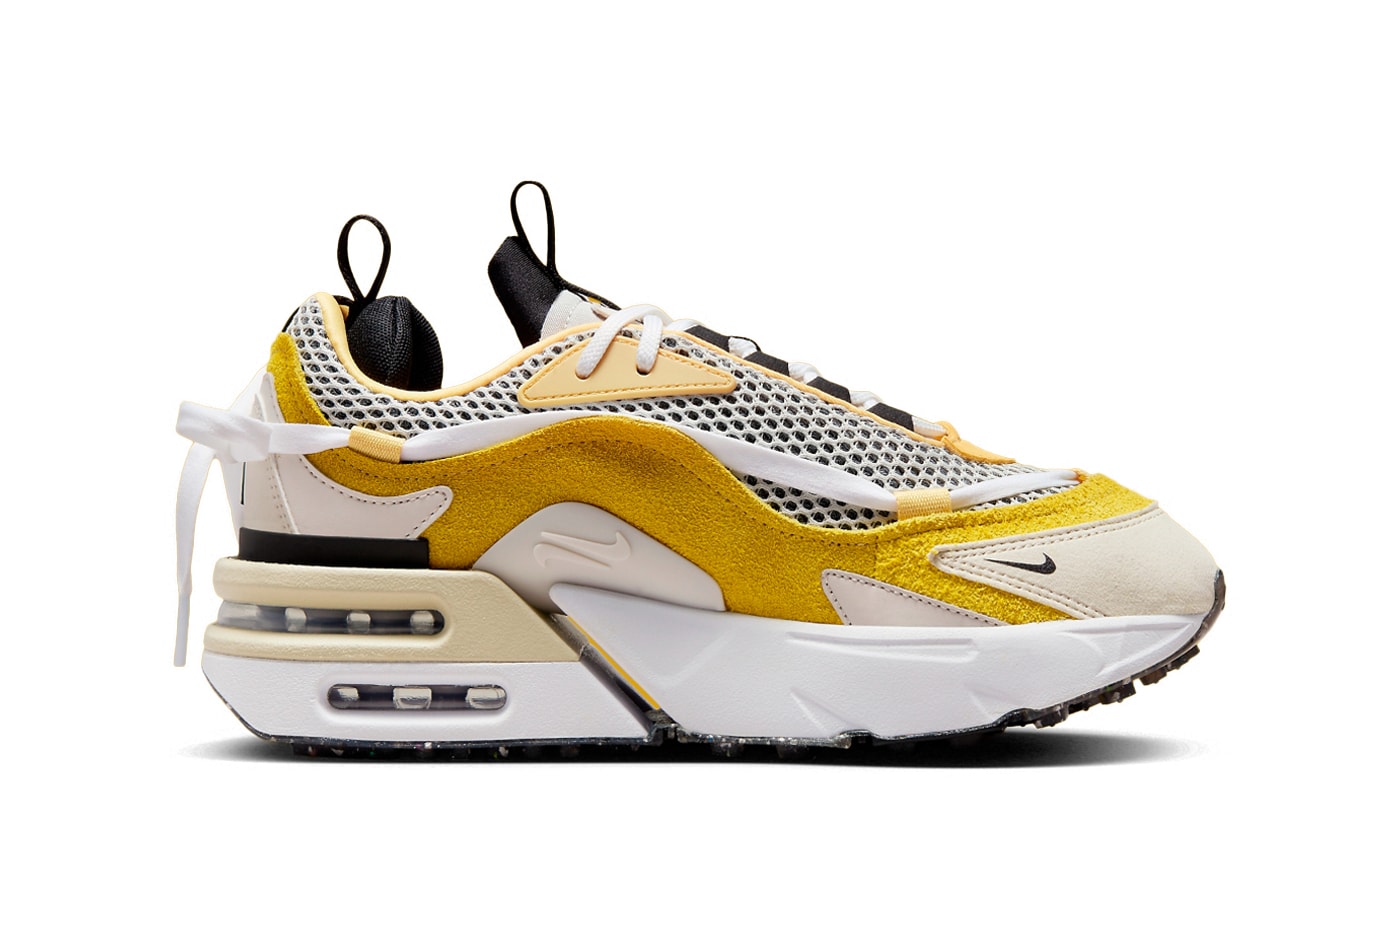 Nike Air Max Furyosa Makes a Bold Return With "Amarillo" FQ8933-001 release info swoosh chunky unconventional shoe